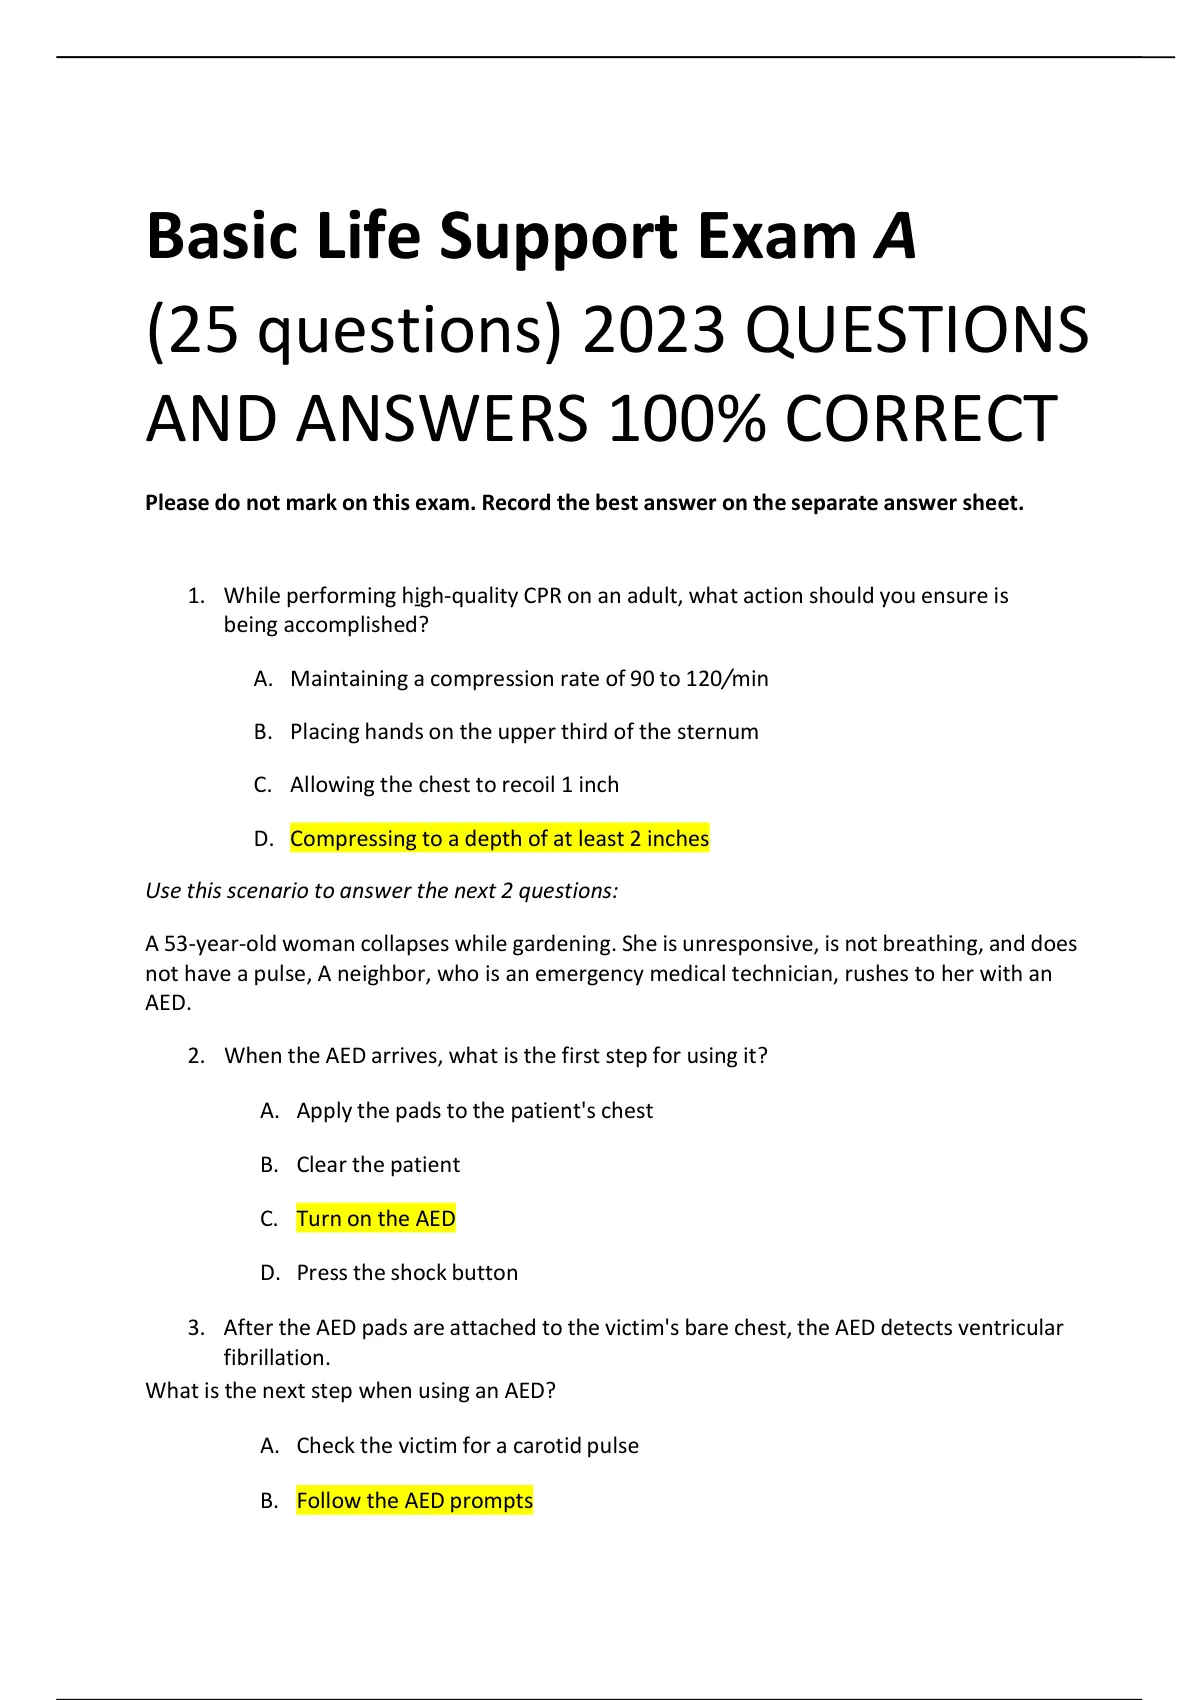 Basic Life Support Exam A (25 questions) 2023 QUESTIONS AND ANSWERS 100